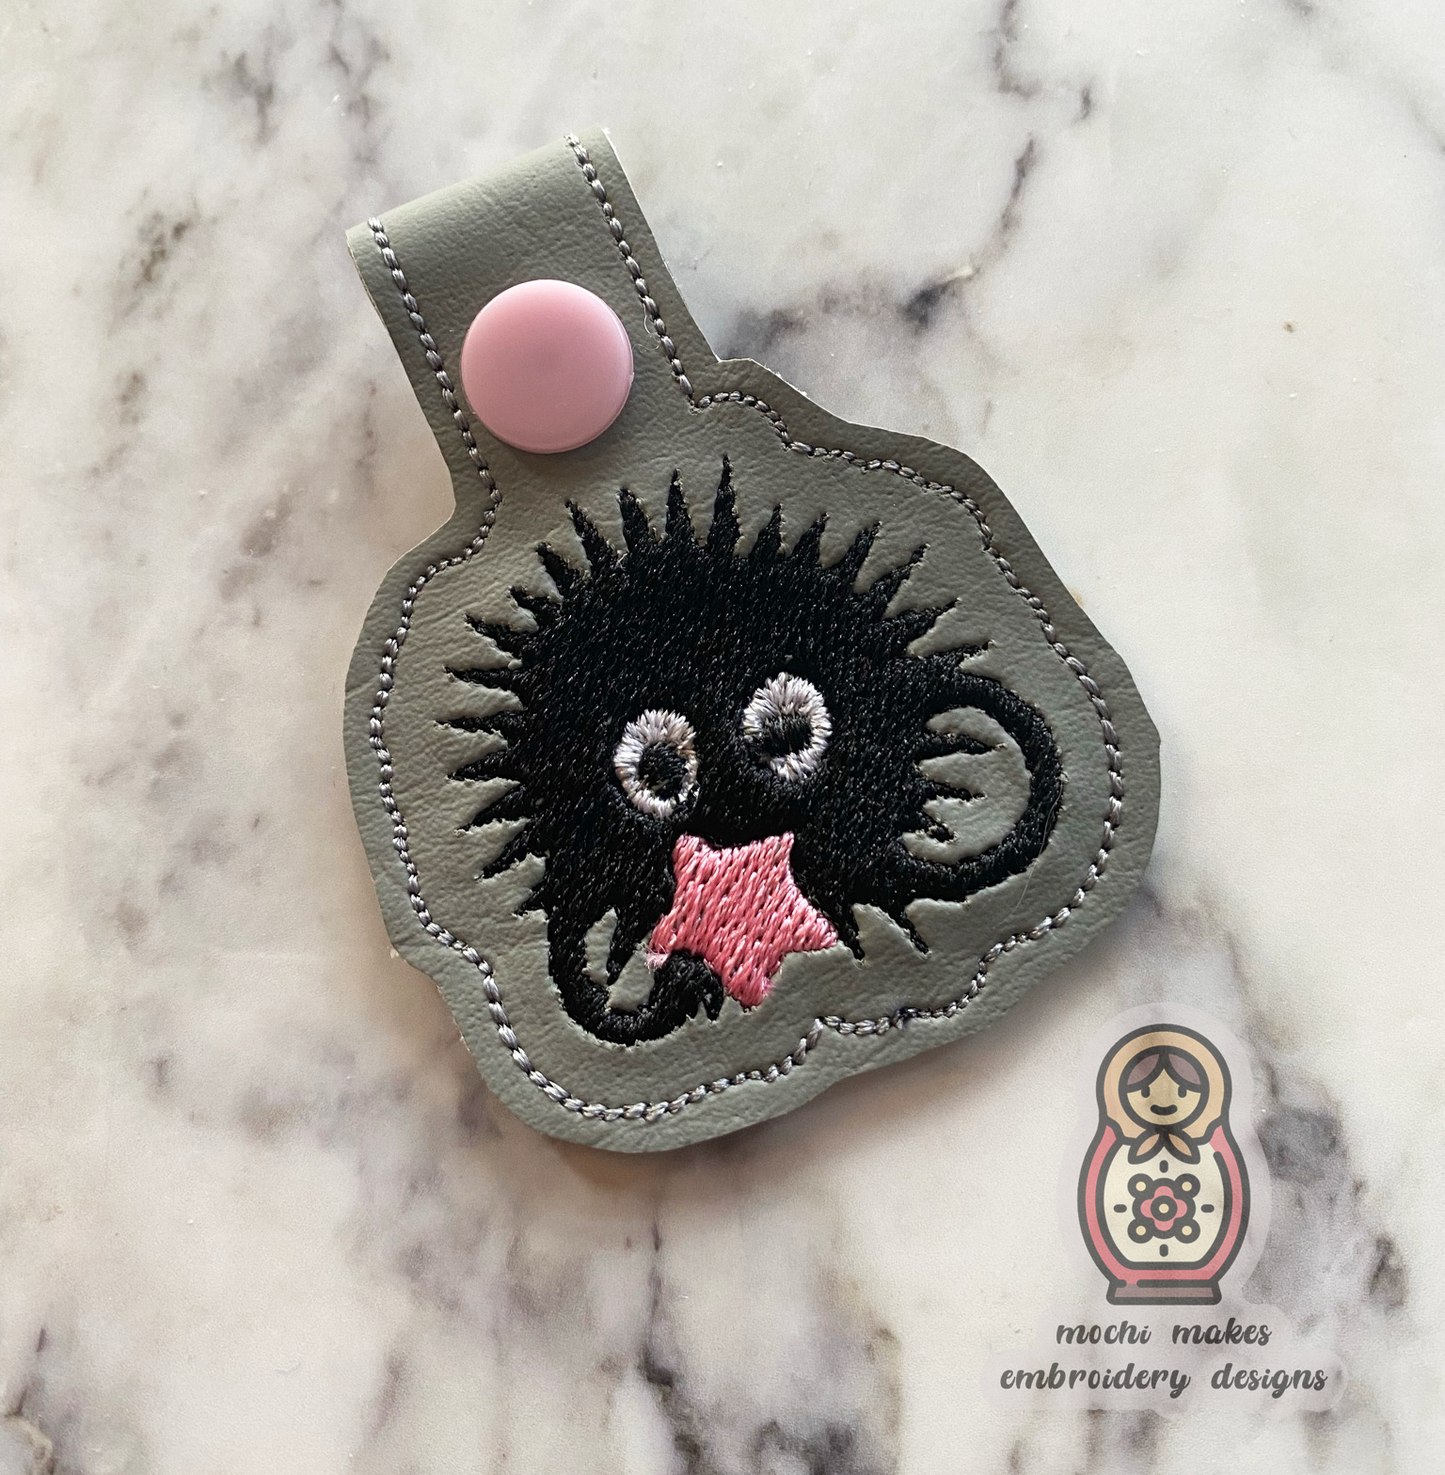 Dust Sprite / Soot Sprite from My Neighbour Totoro ITH Keychain Digital Embroidery Design 4x4